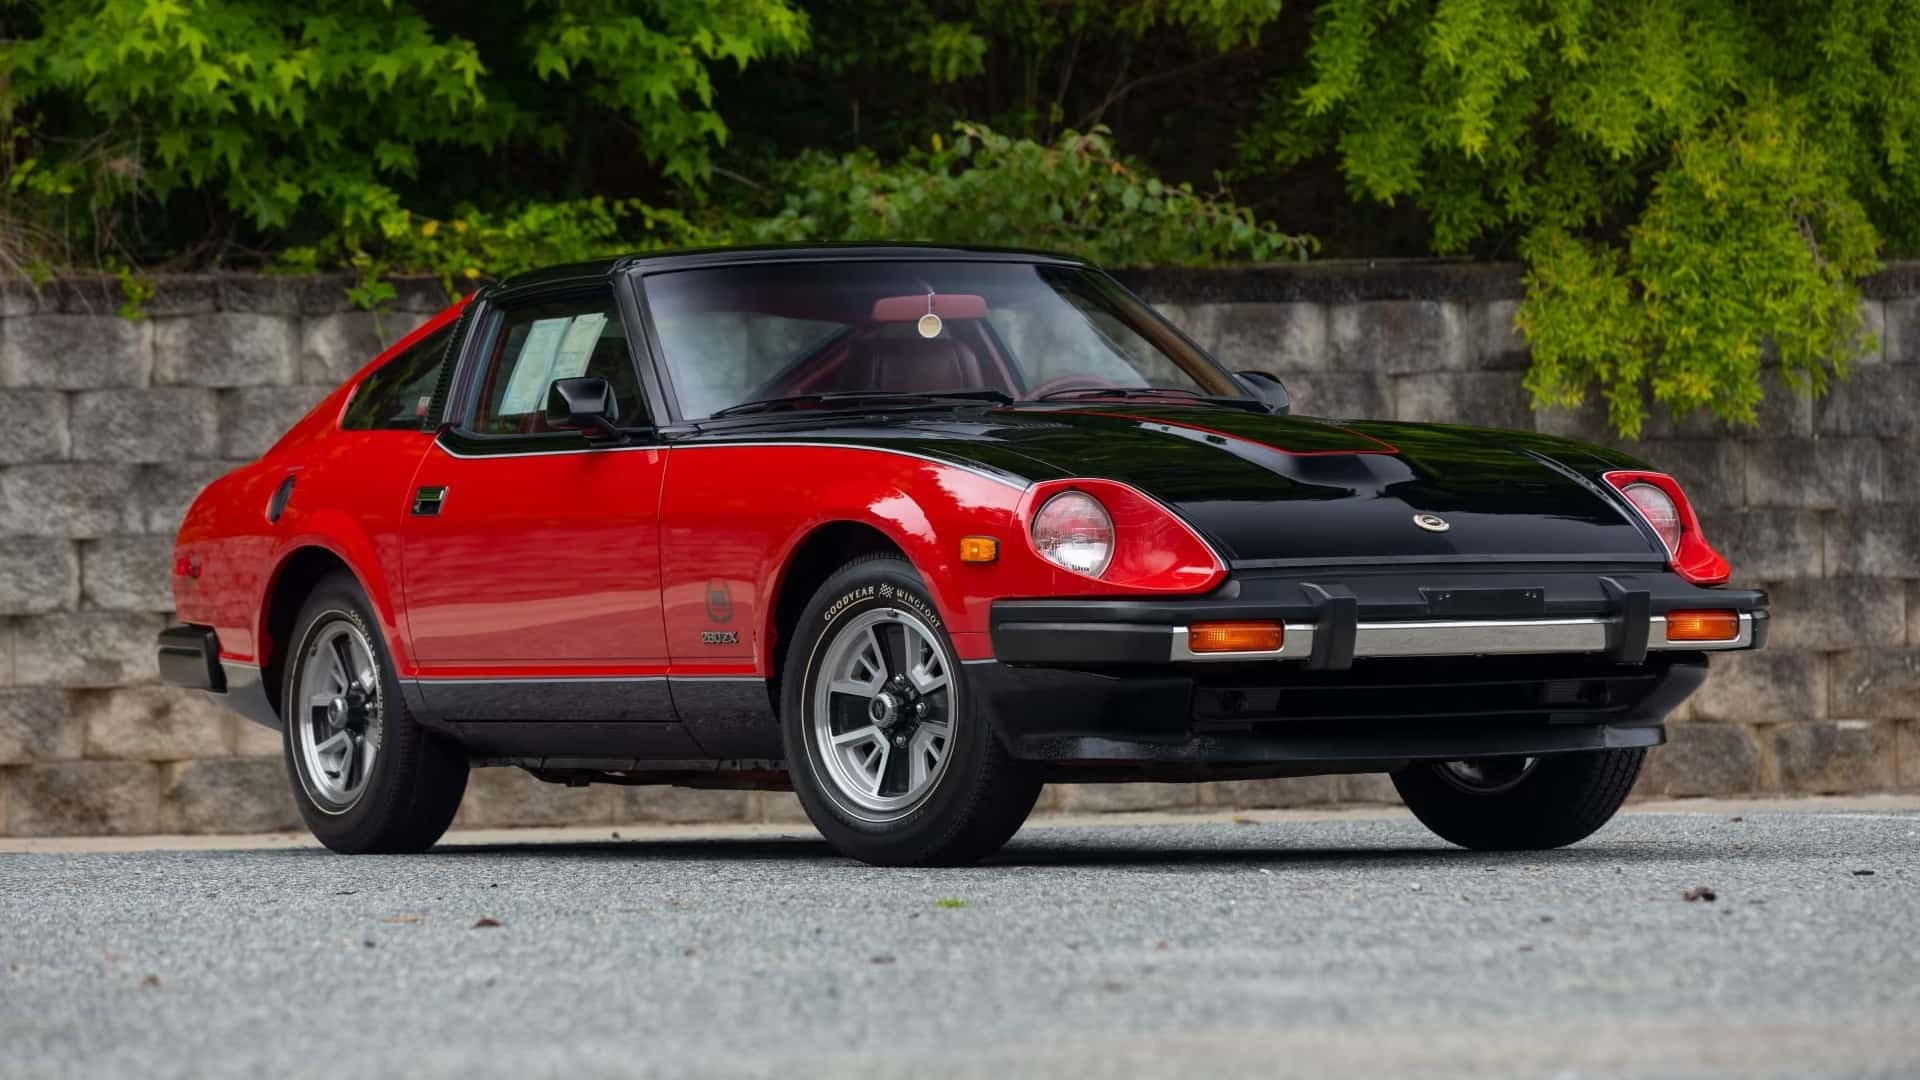 10th Anniversary 1980 Datsun 280ZX Sells for $231,000 at Auction